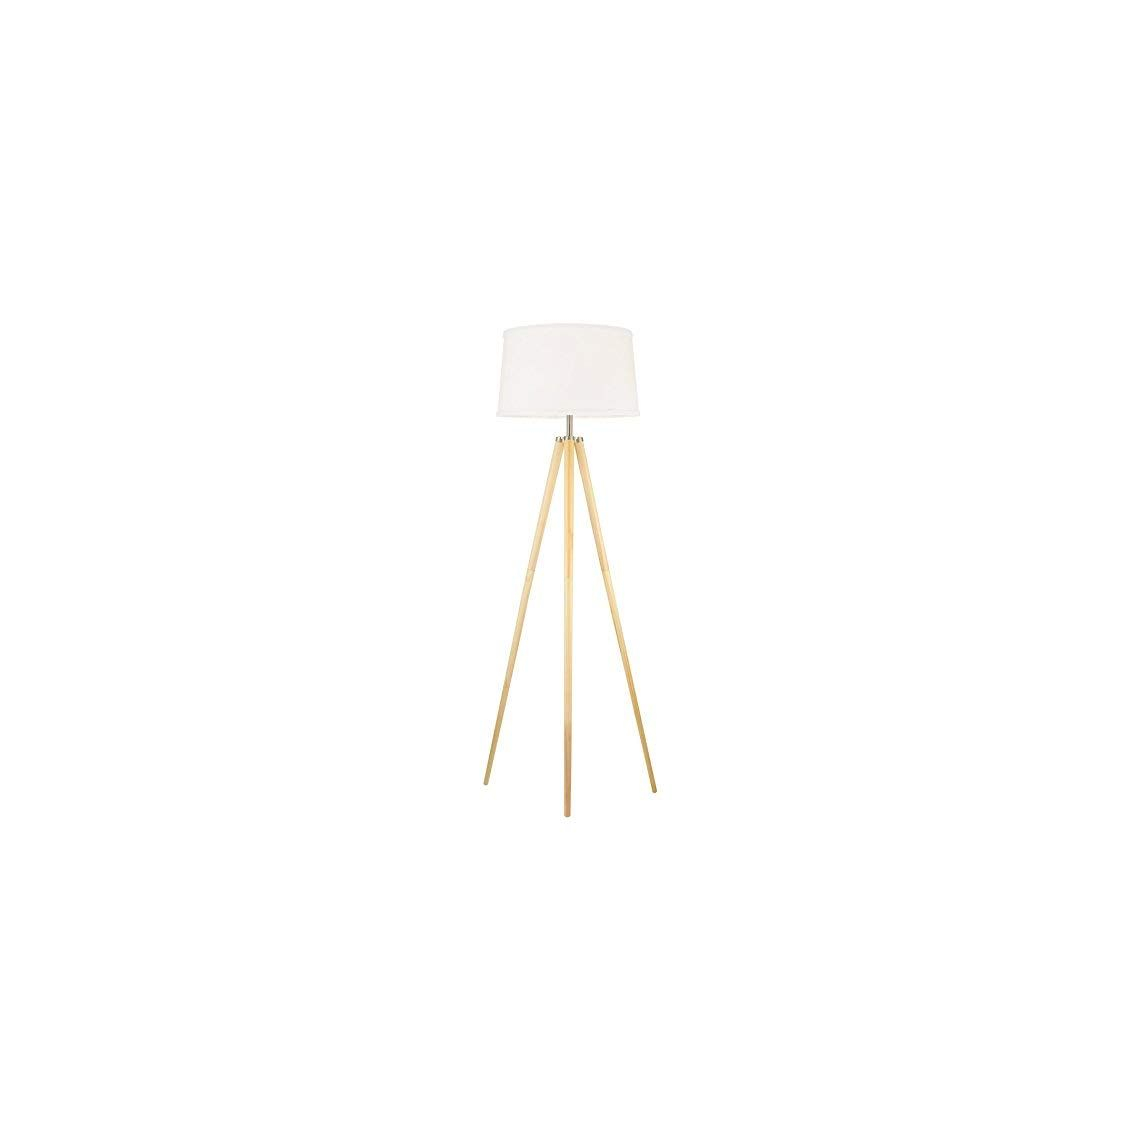 Revel Grace 605 Contemporary Wooden Tripod Led Floor Lamp pertaining to proportions 1140 X 1140